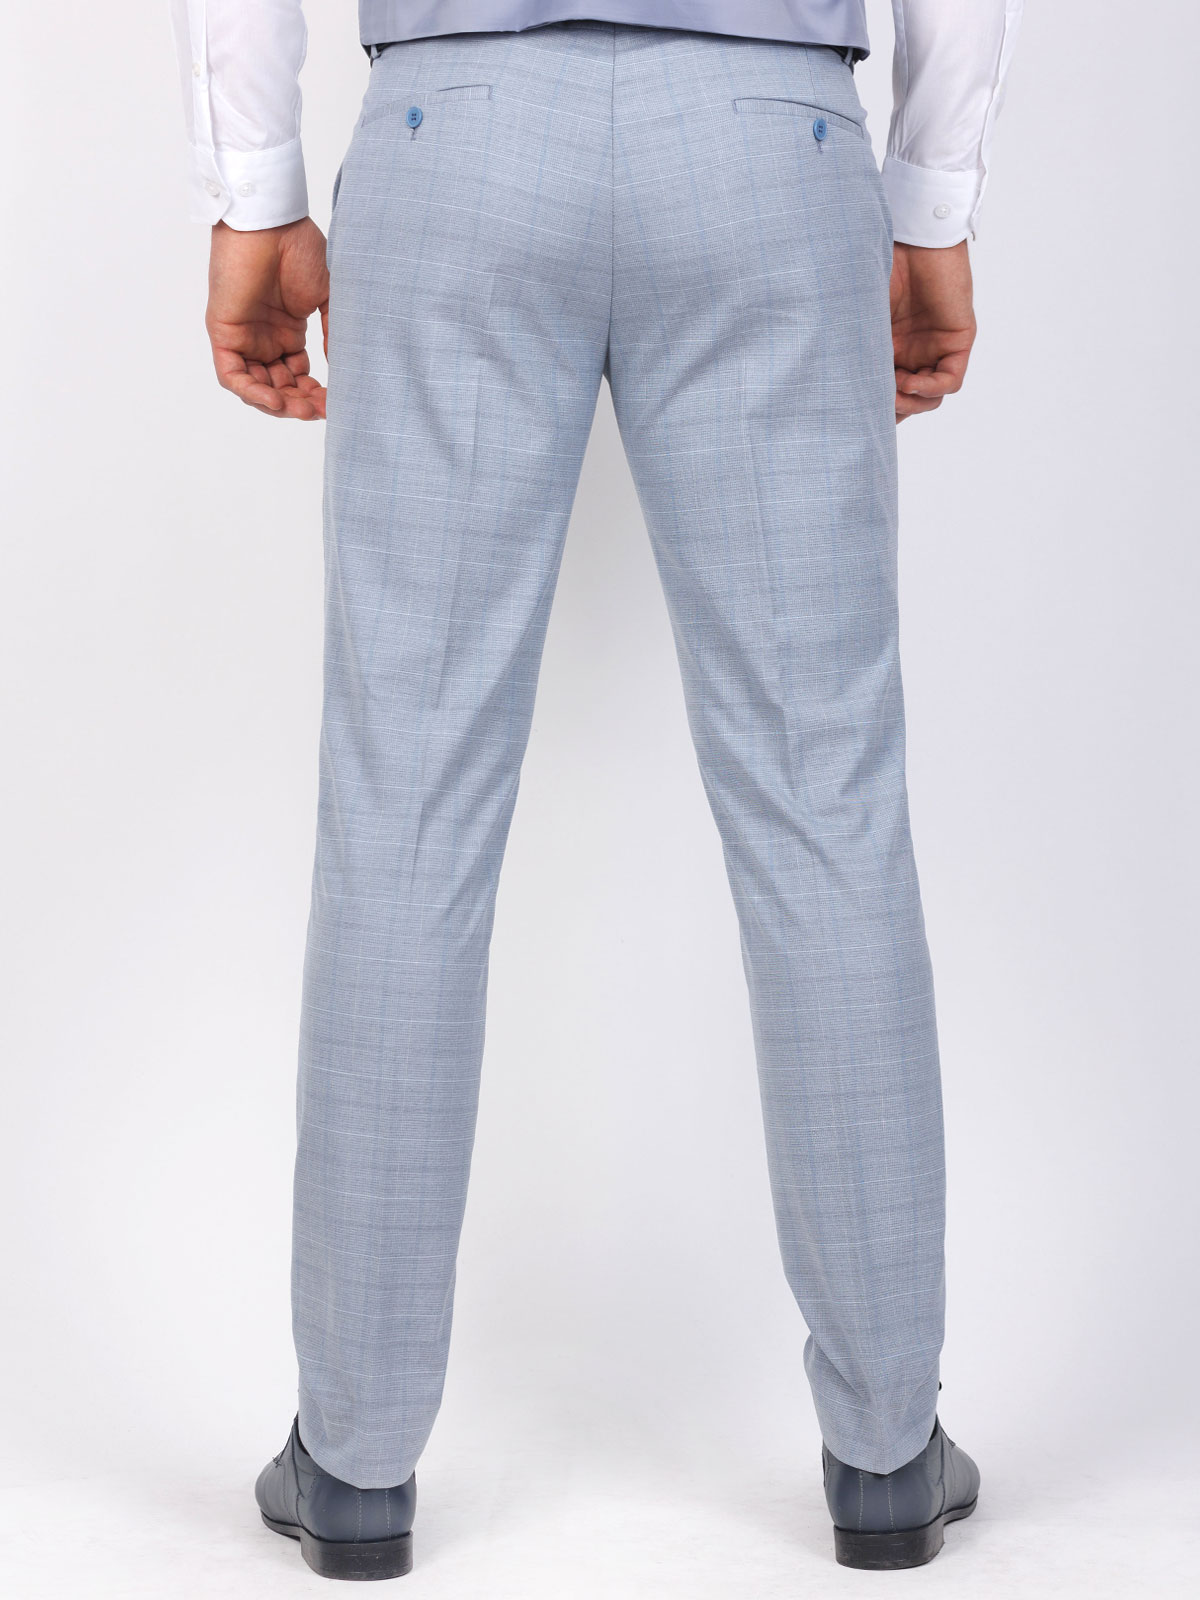 Classic trousers with a fitted silhouett - 63338 € 62.99 img4